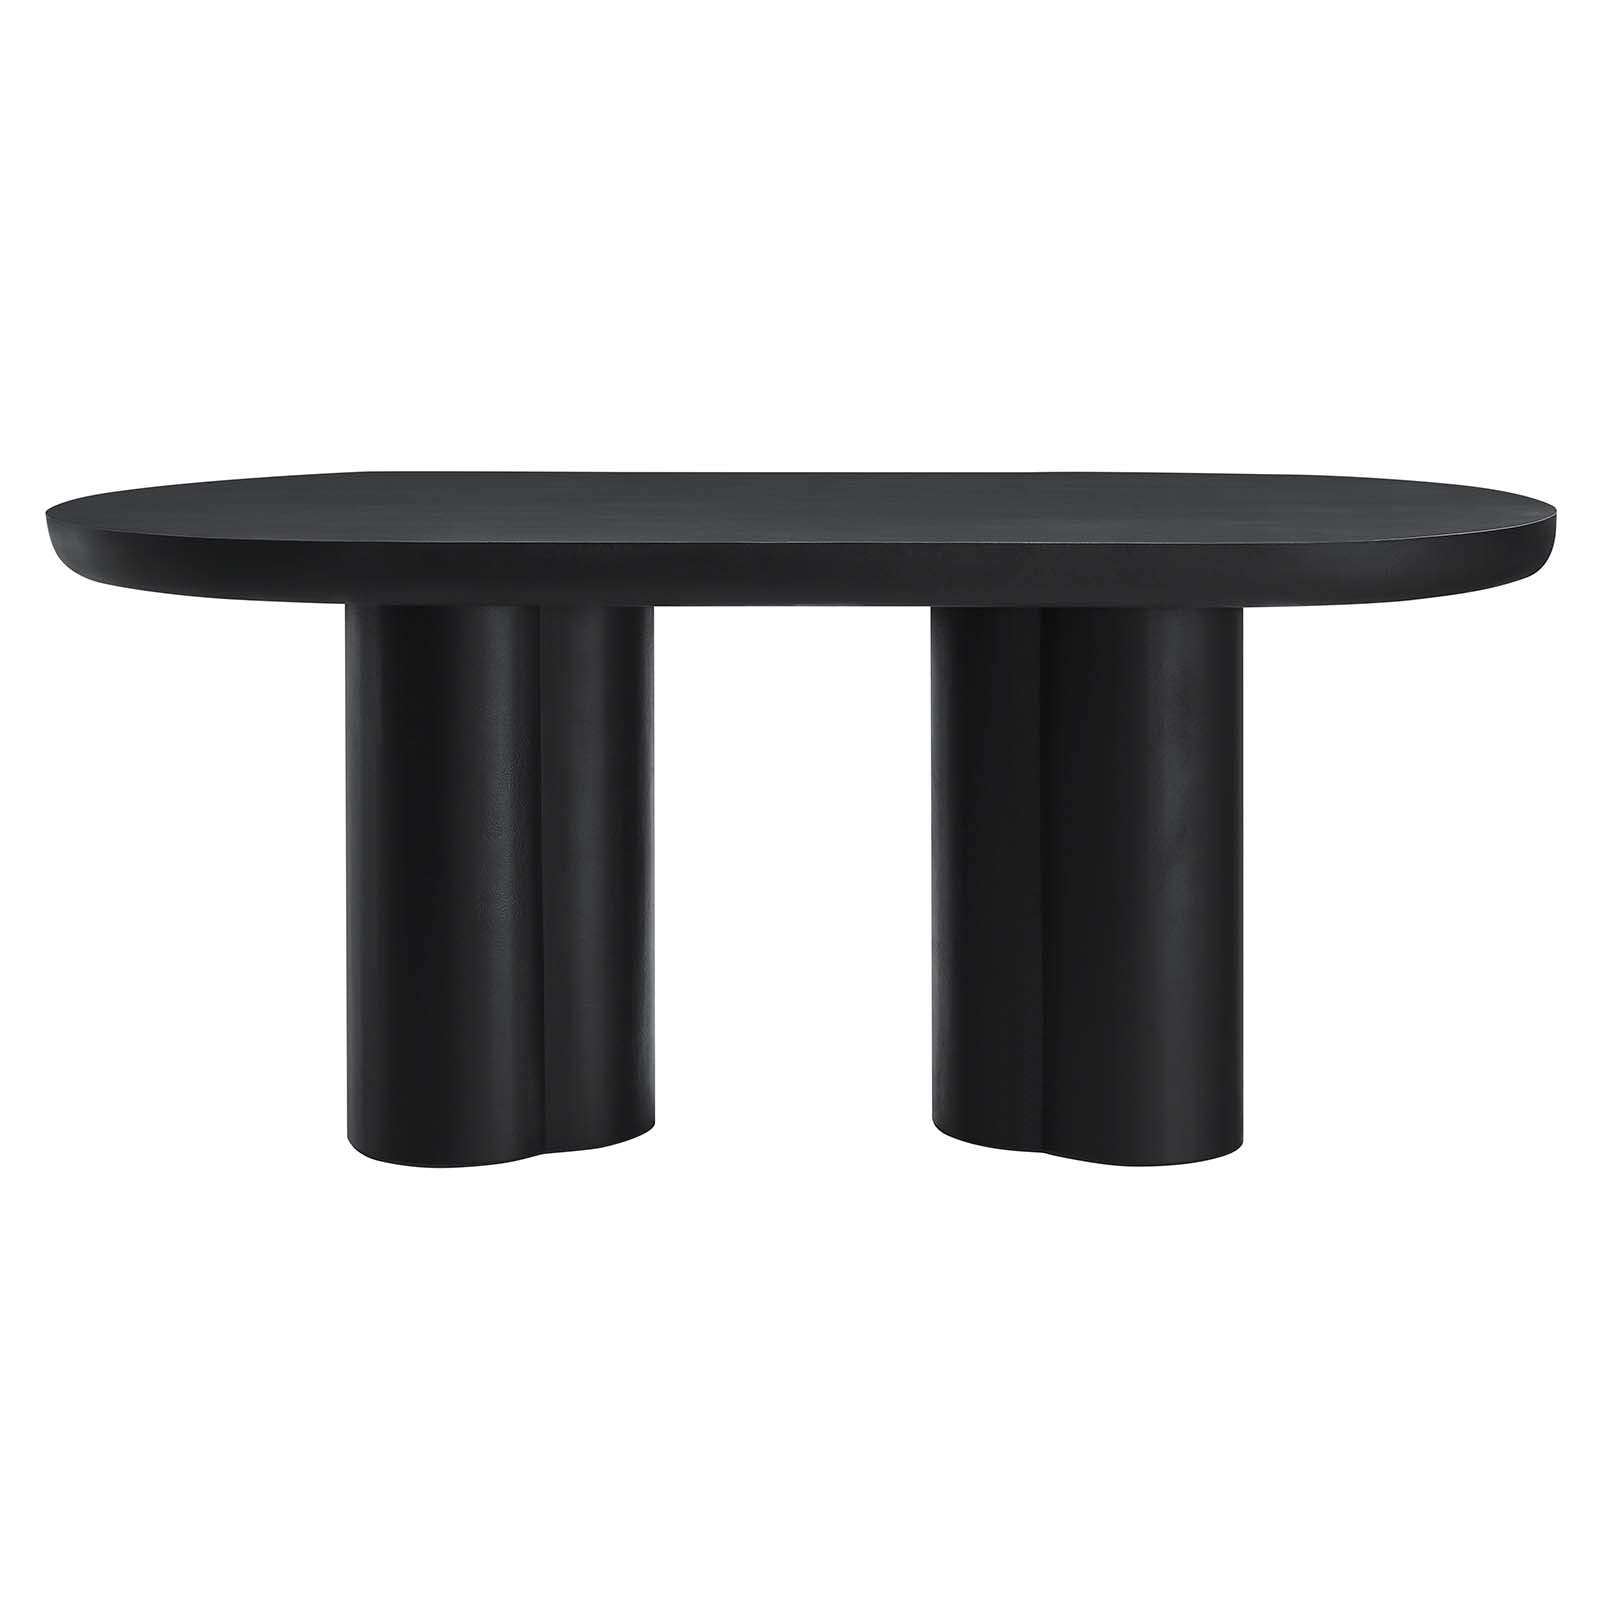 Caspian 72" Oval Concrete Dining Table - East Shore Modern Home Furnishings